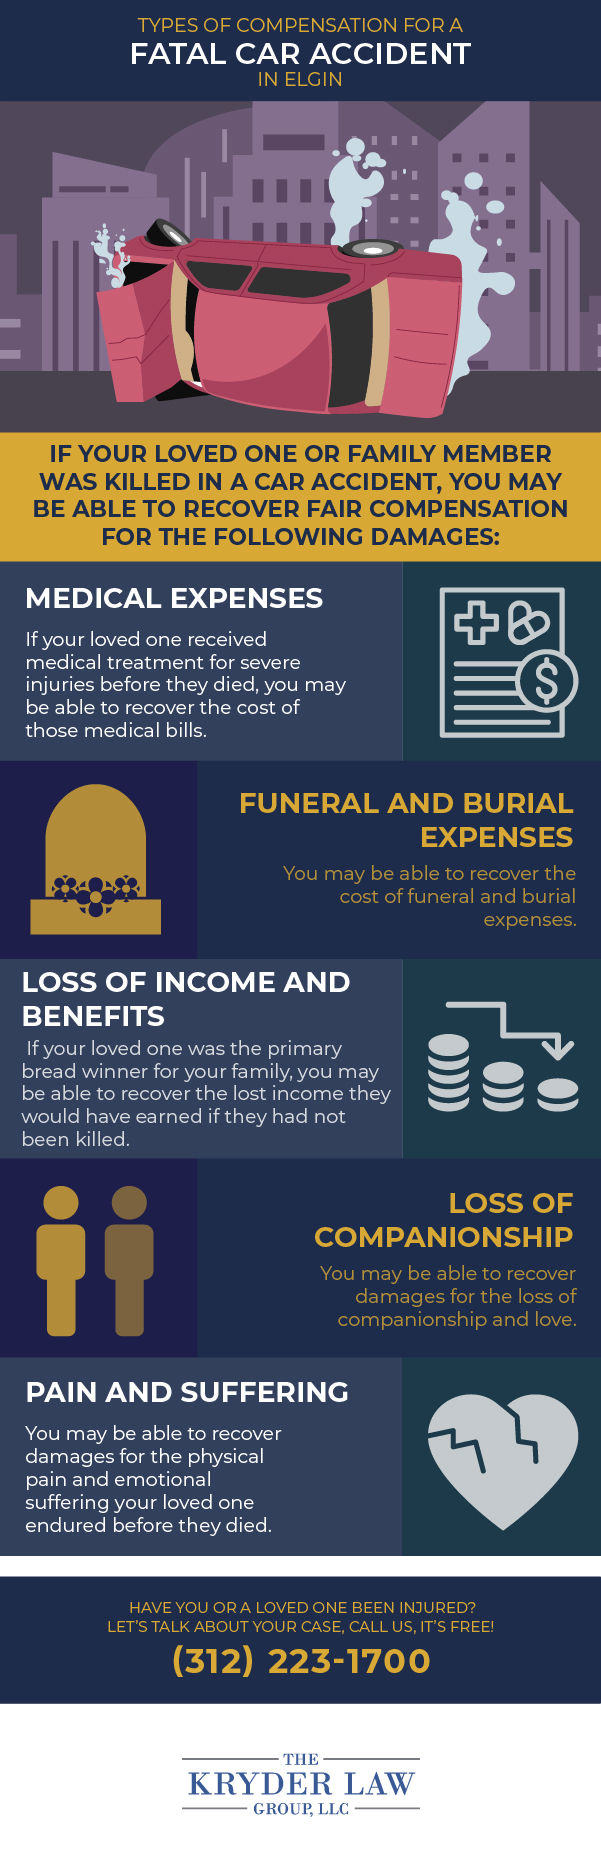 Types of Compensation for a Fatal Car Accident in Elgin Infographic